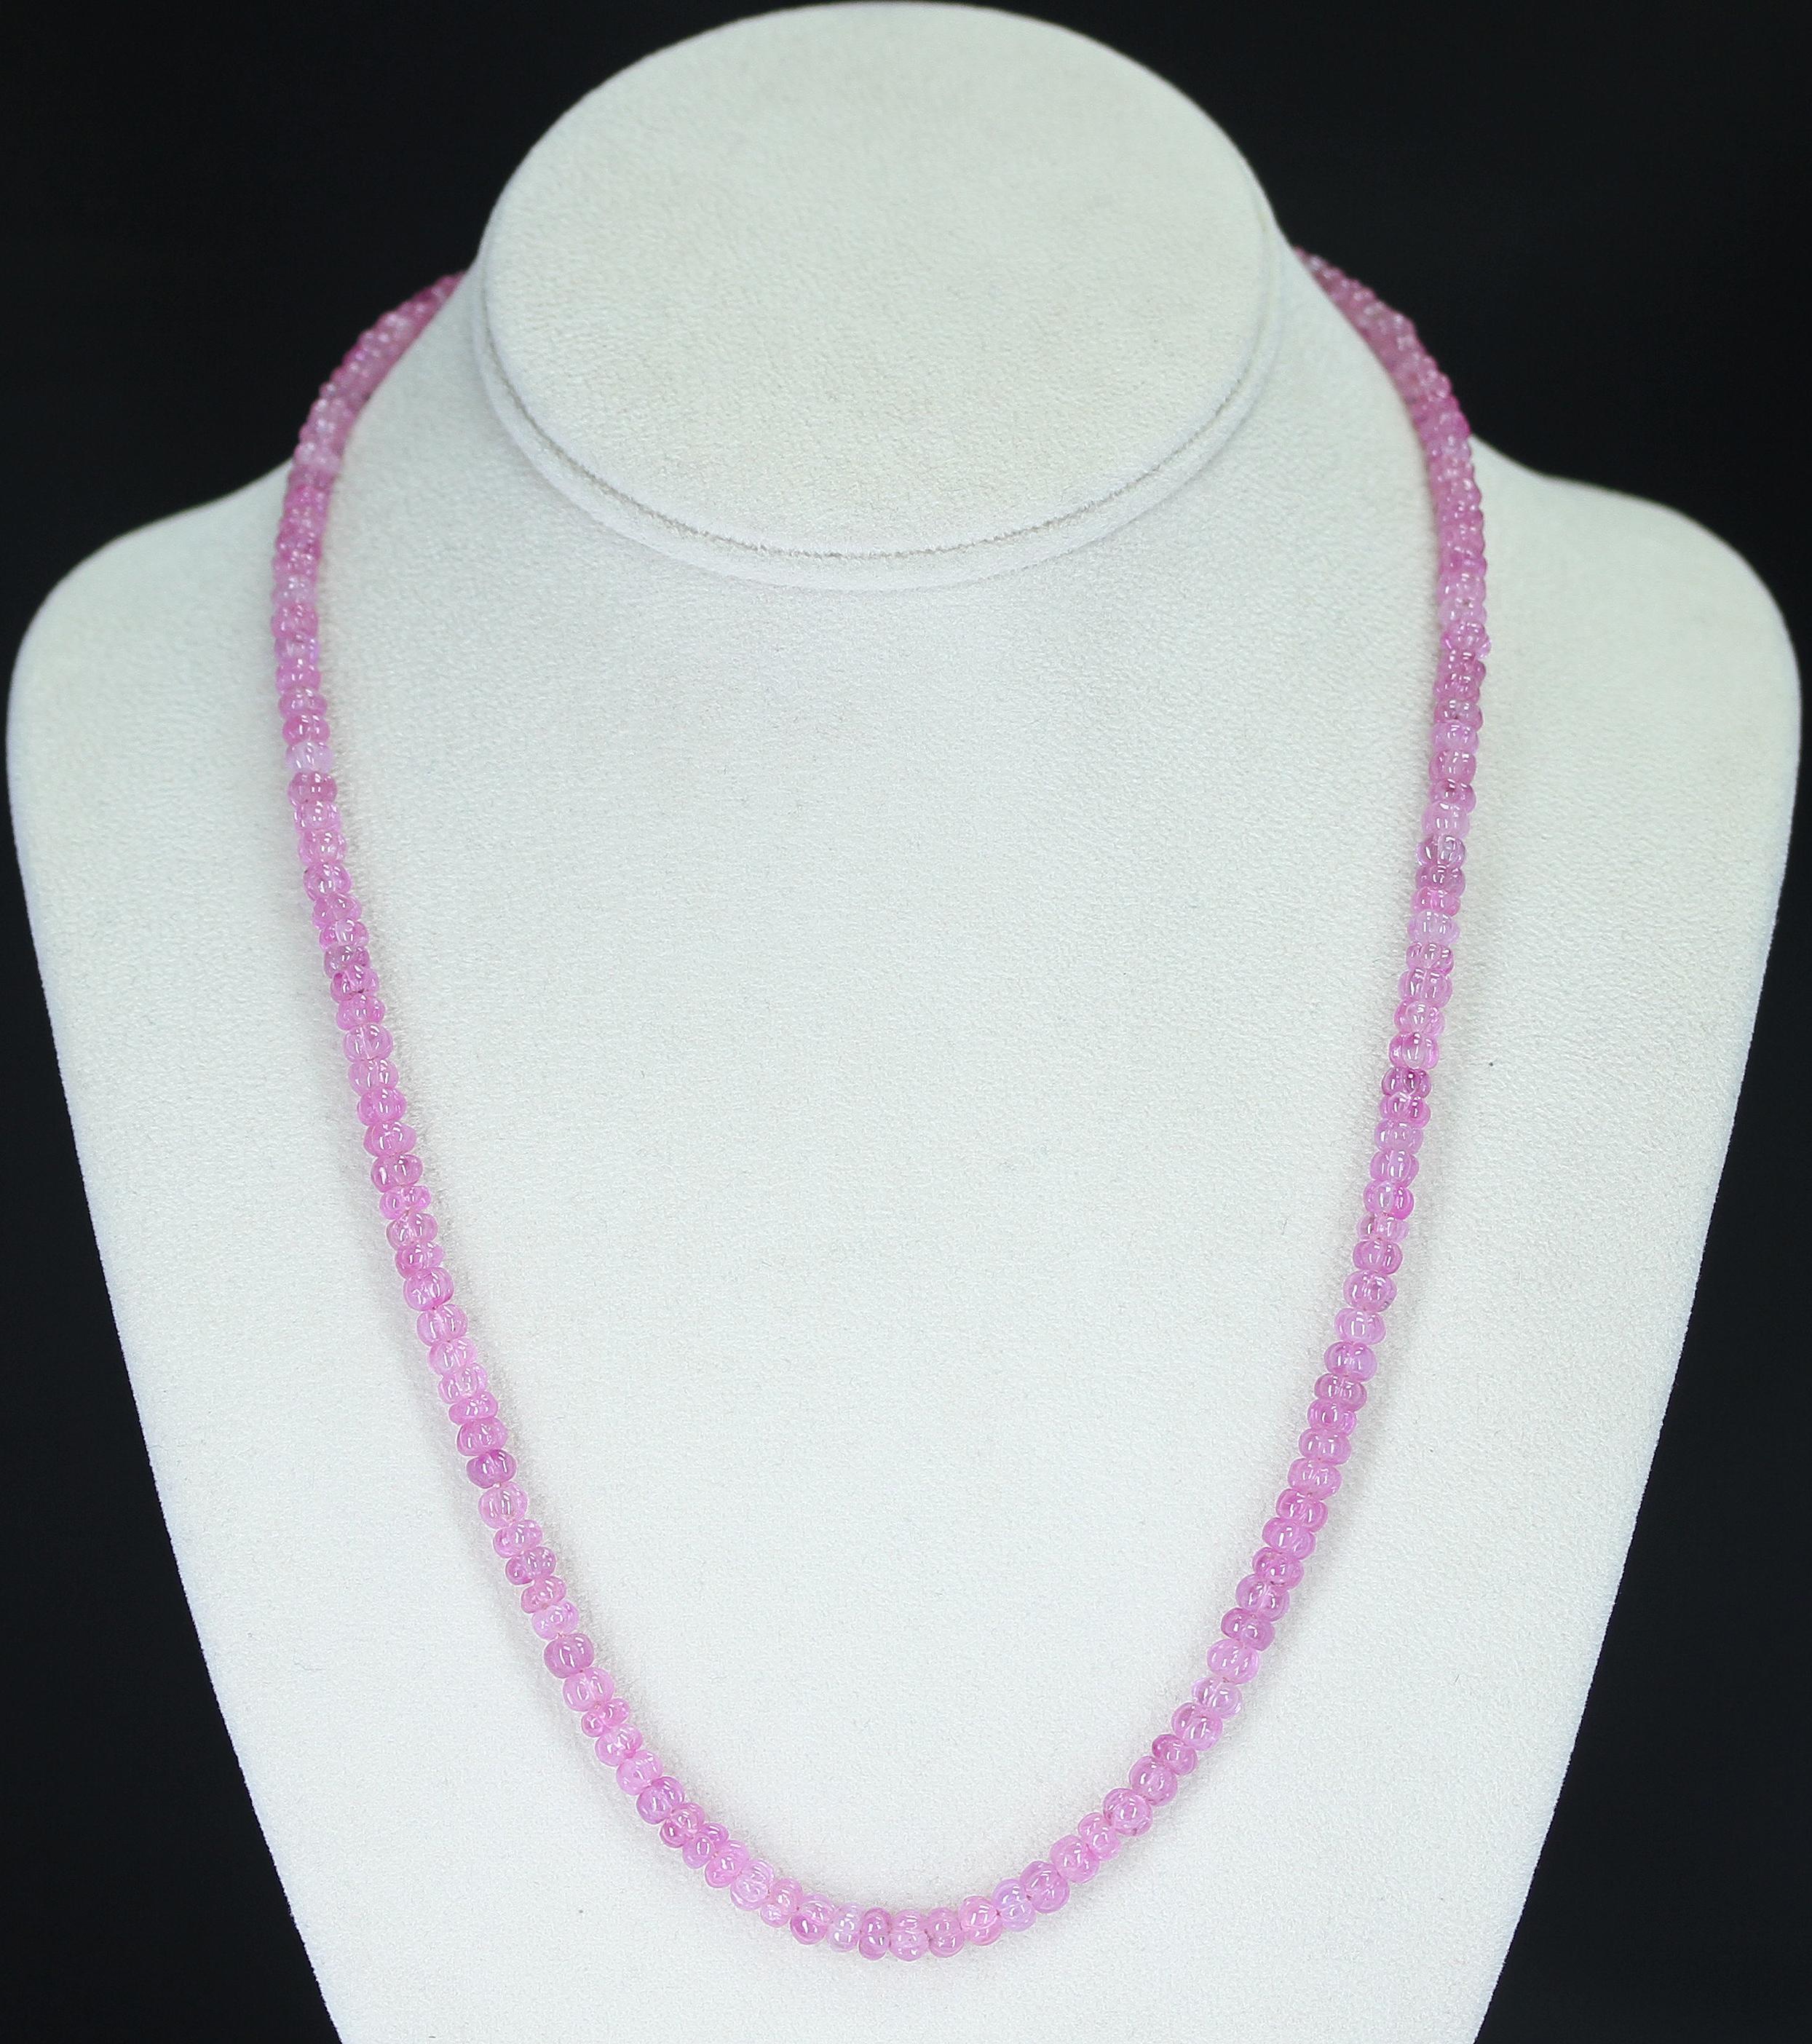 A Genuine & Natural Pink Sapphire Carved Beads Necklace with a 14K Clasp. The necklace weighs 145 carats, the length is 21 inches, and the beads range from 5MM to 5.50MM. 

We can also customize the necklace according to your preferences, as per the